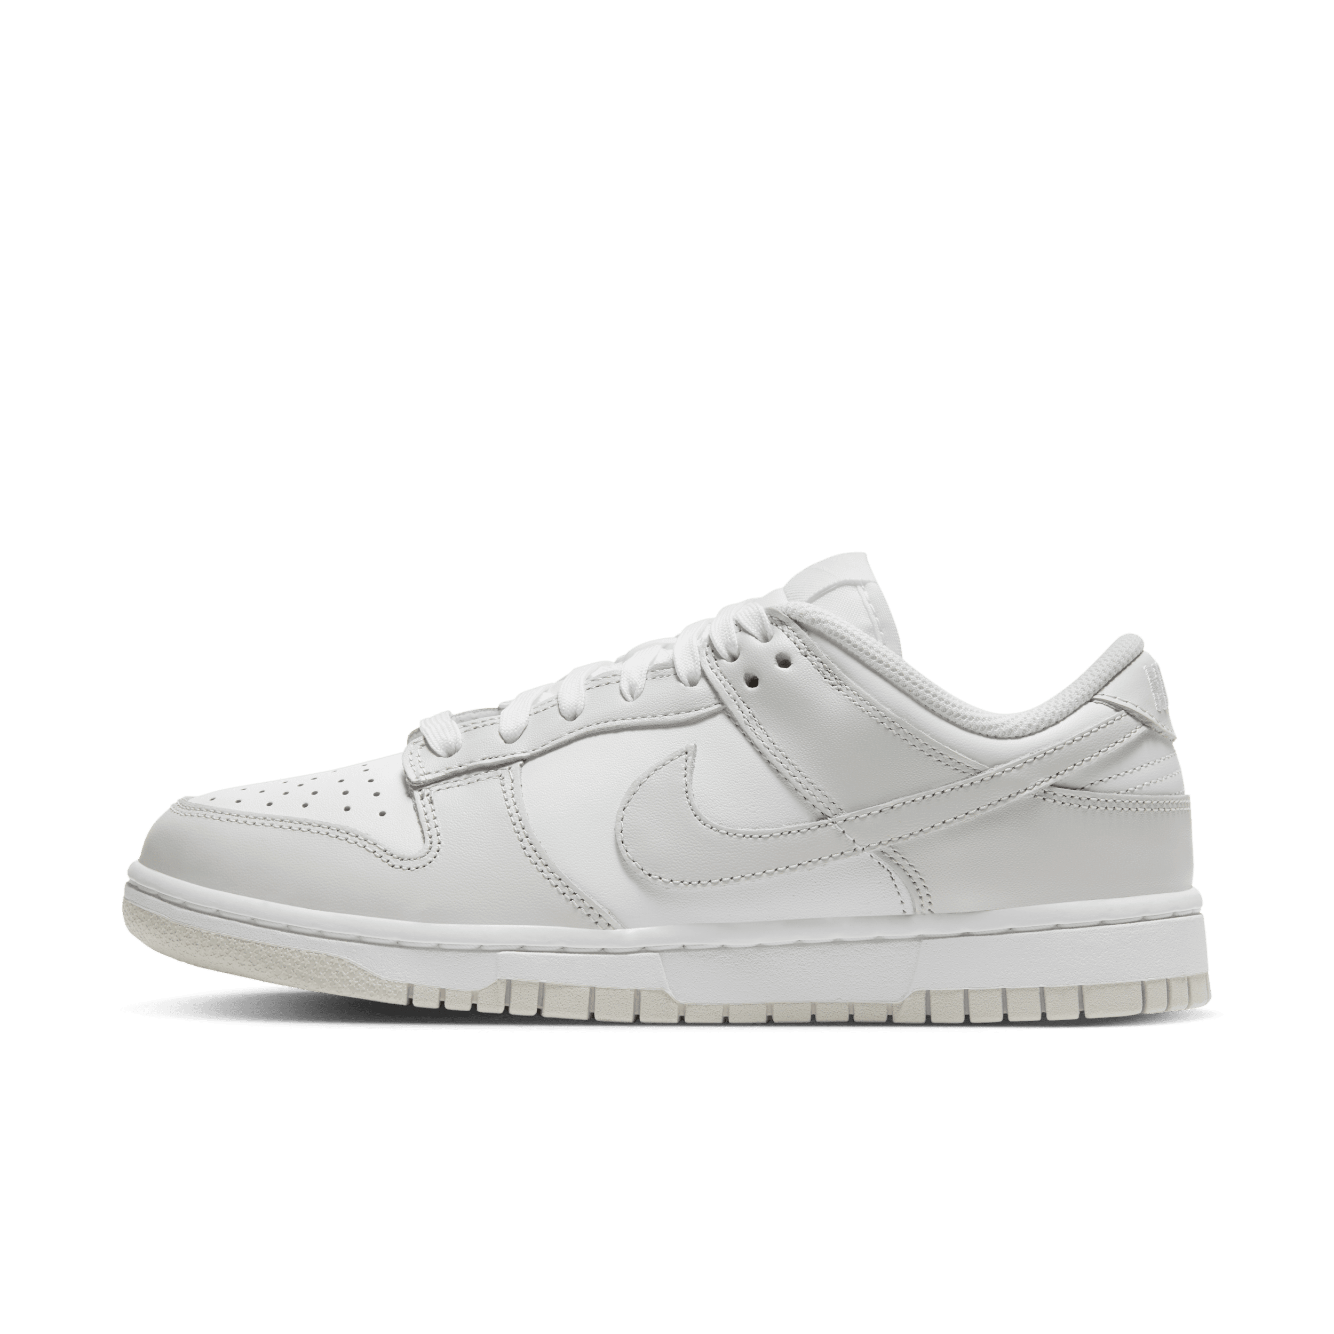 Chaussure Nike Dunk Low pour Femme – Blanc